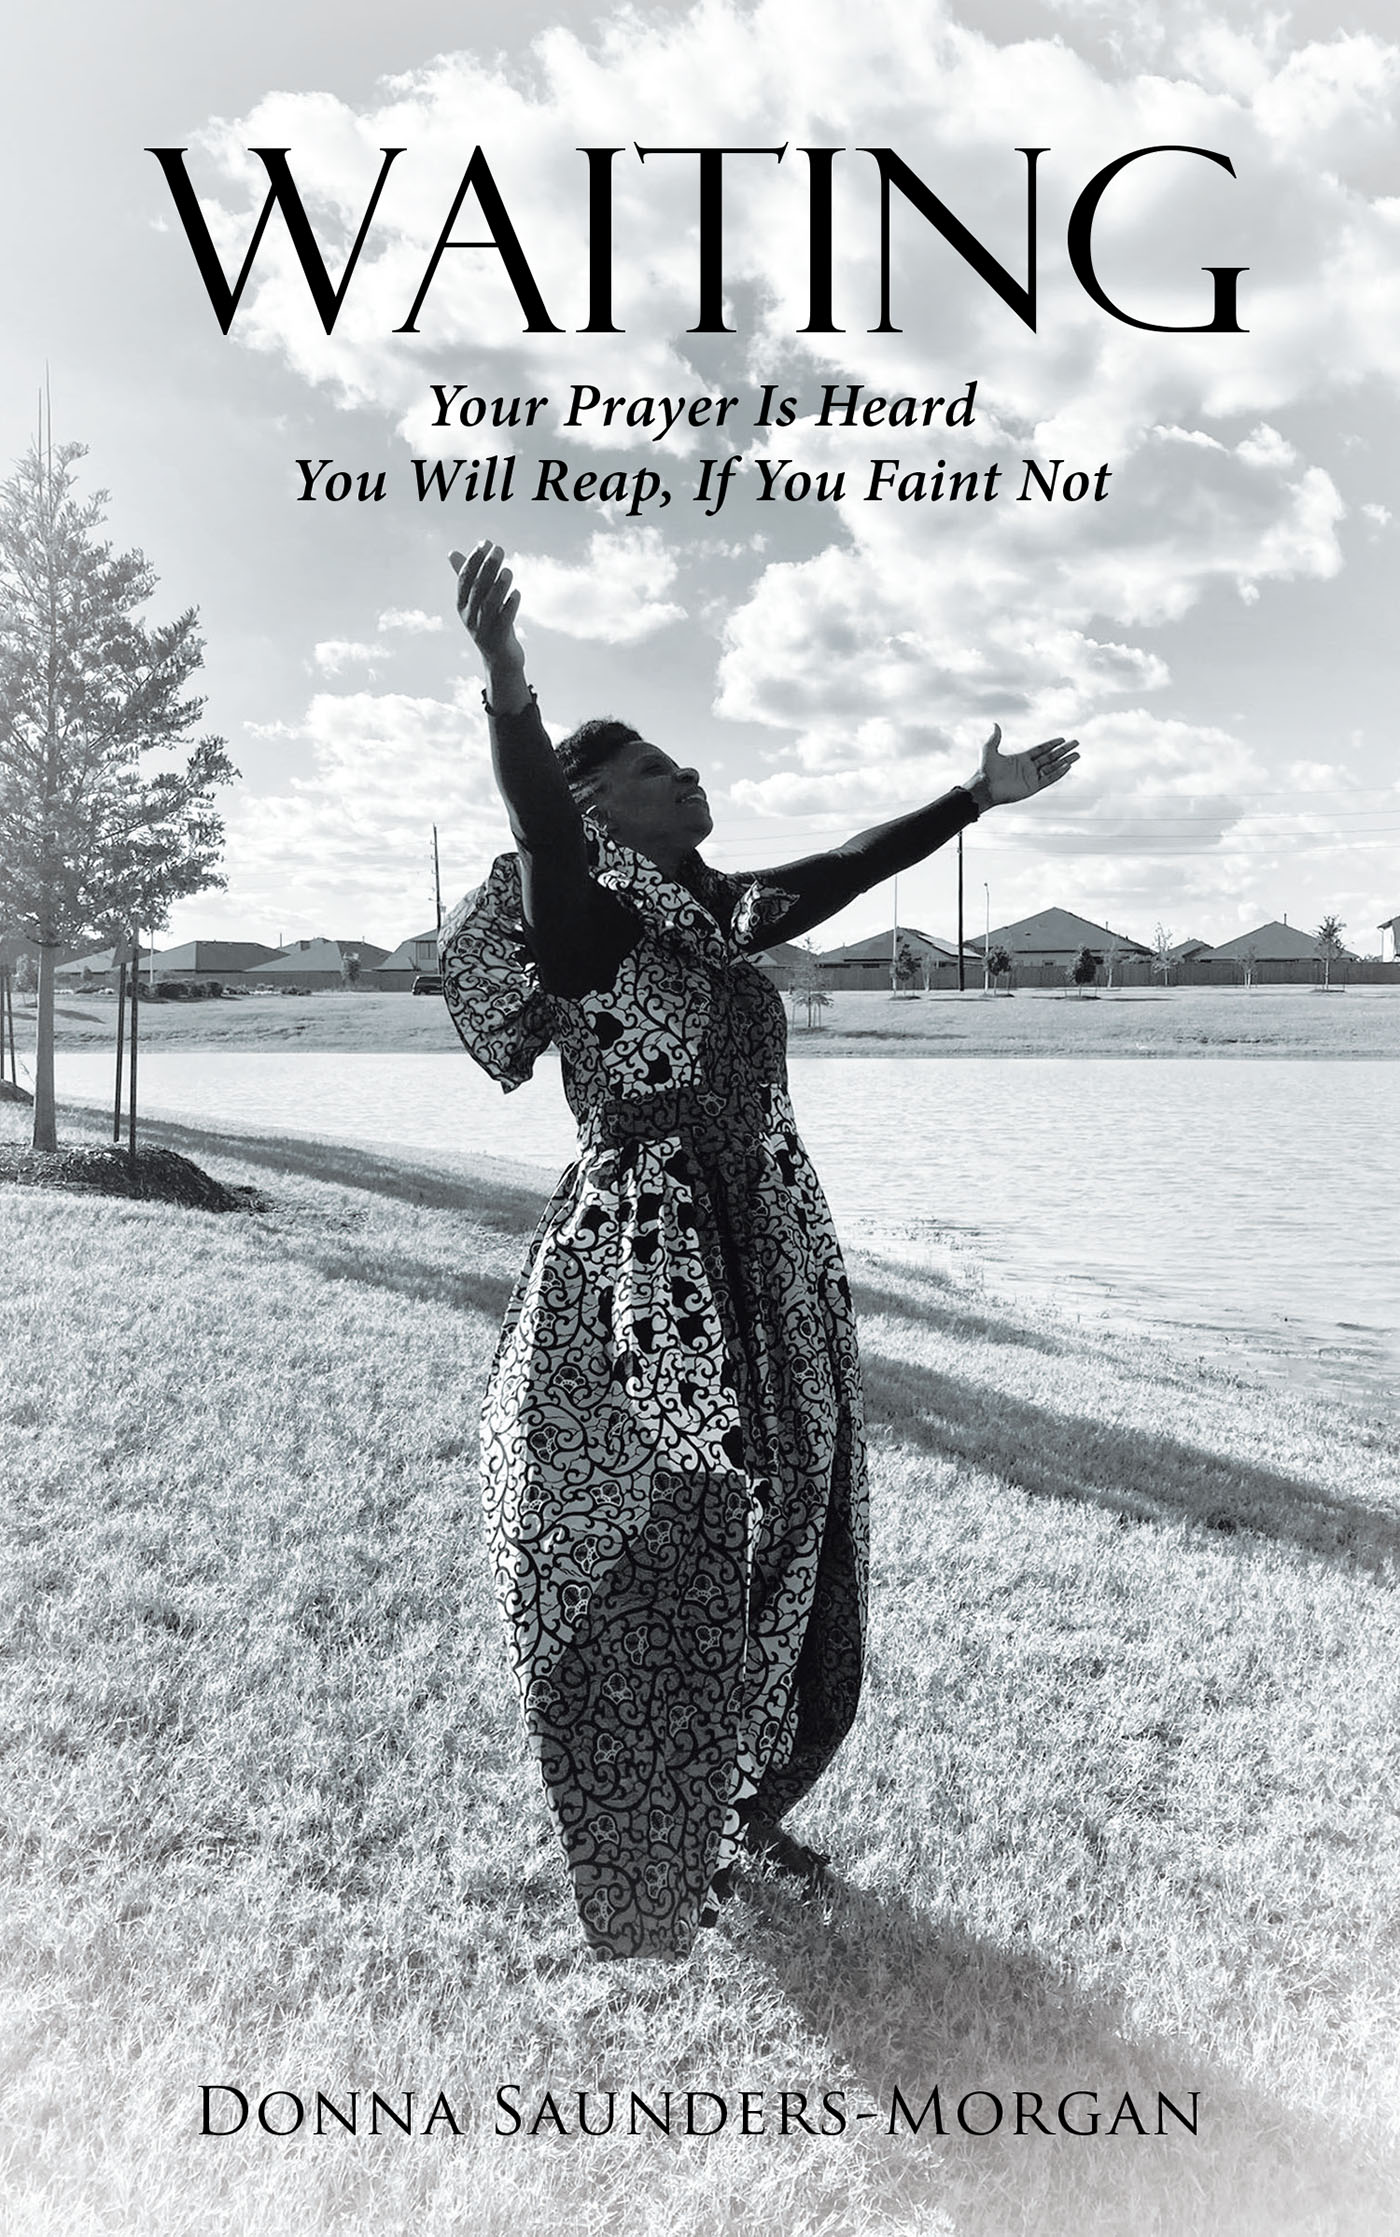 Author Donna Saunders-Morgan’s New Book, “Waiting: Your Prayer Is Heard You Will Reap, If You Faint Not,” Invites Readers to Listen to the Will of God